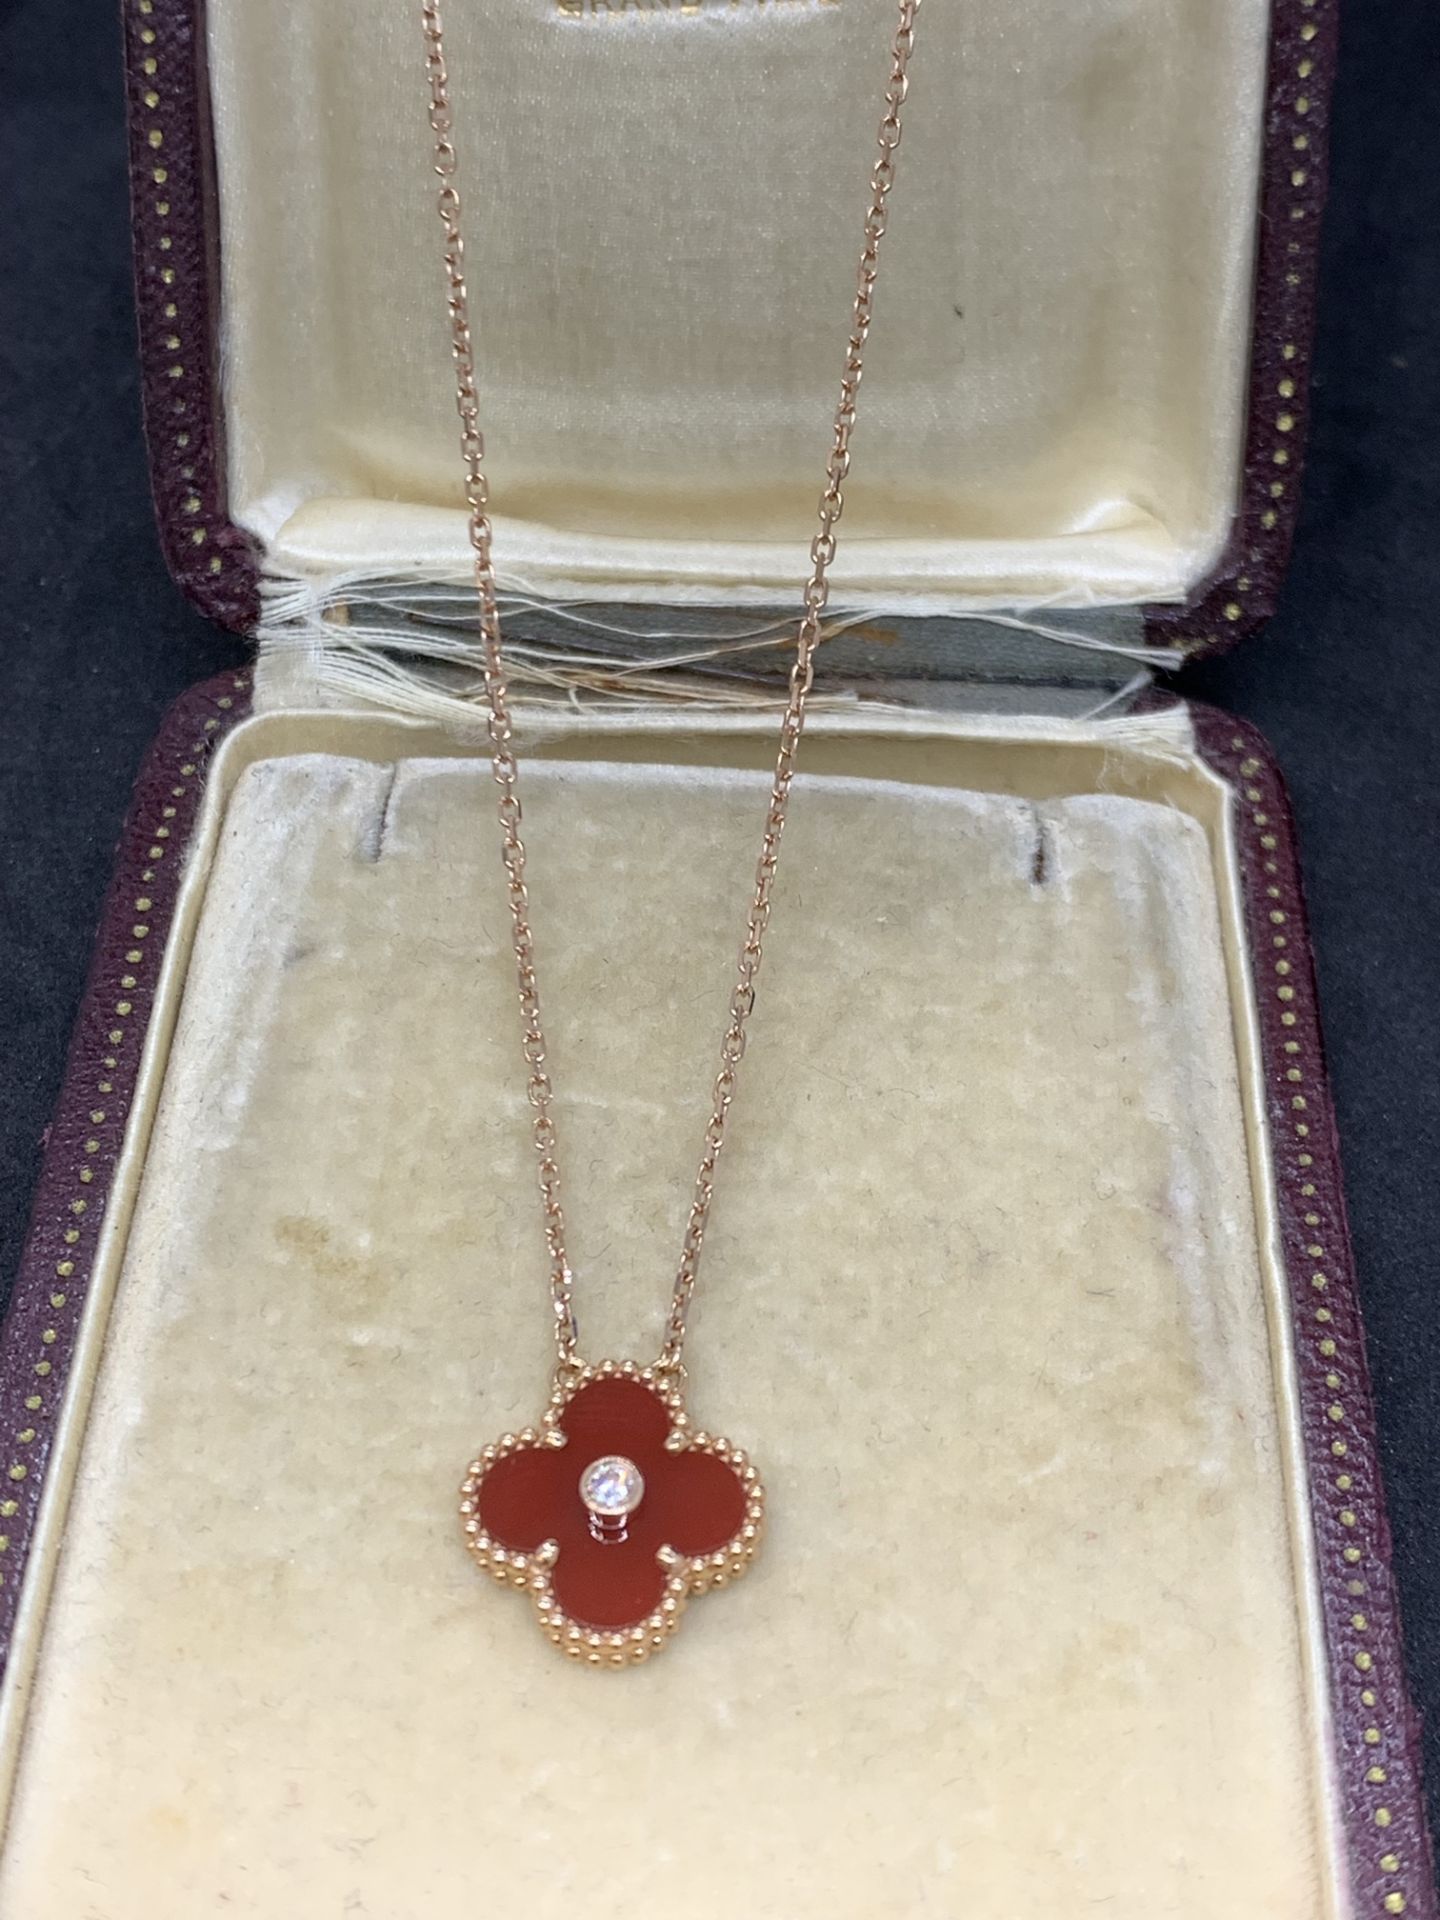 18 carat rose gold Diamond set pendant and chain marked VCA 750 - Image 2 of 7